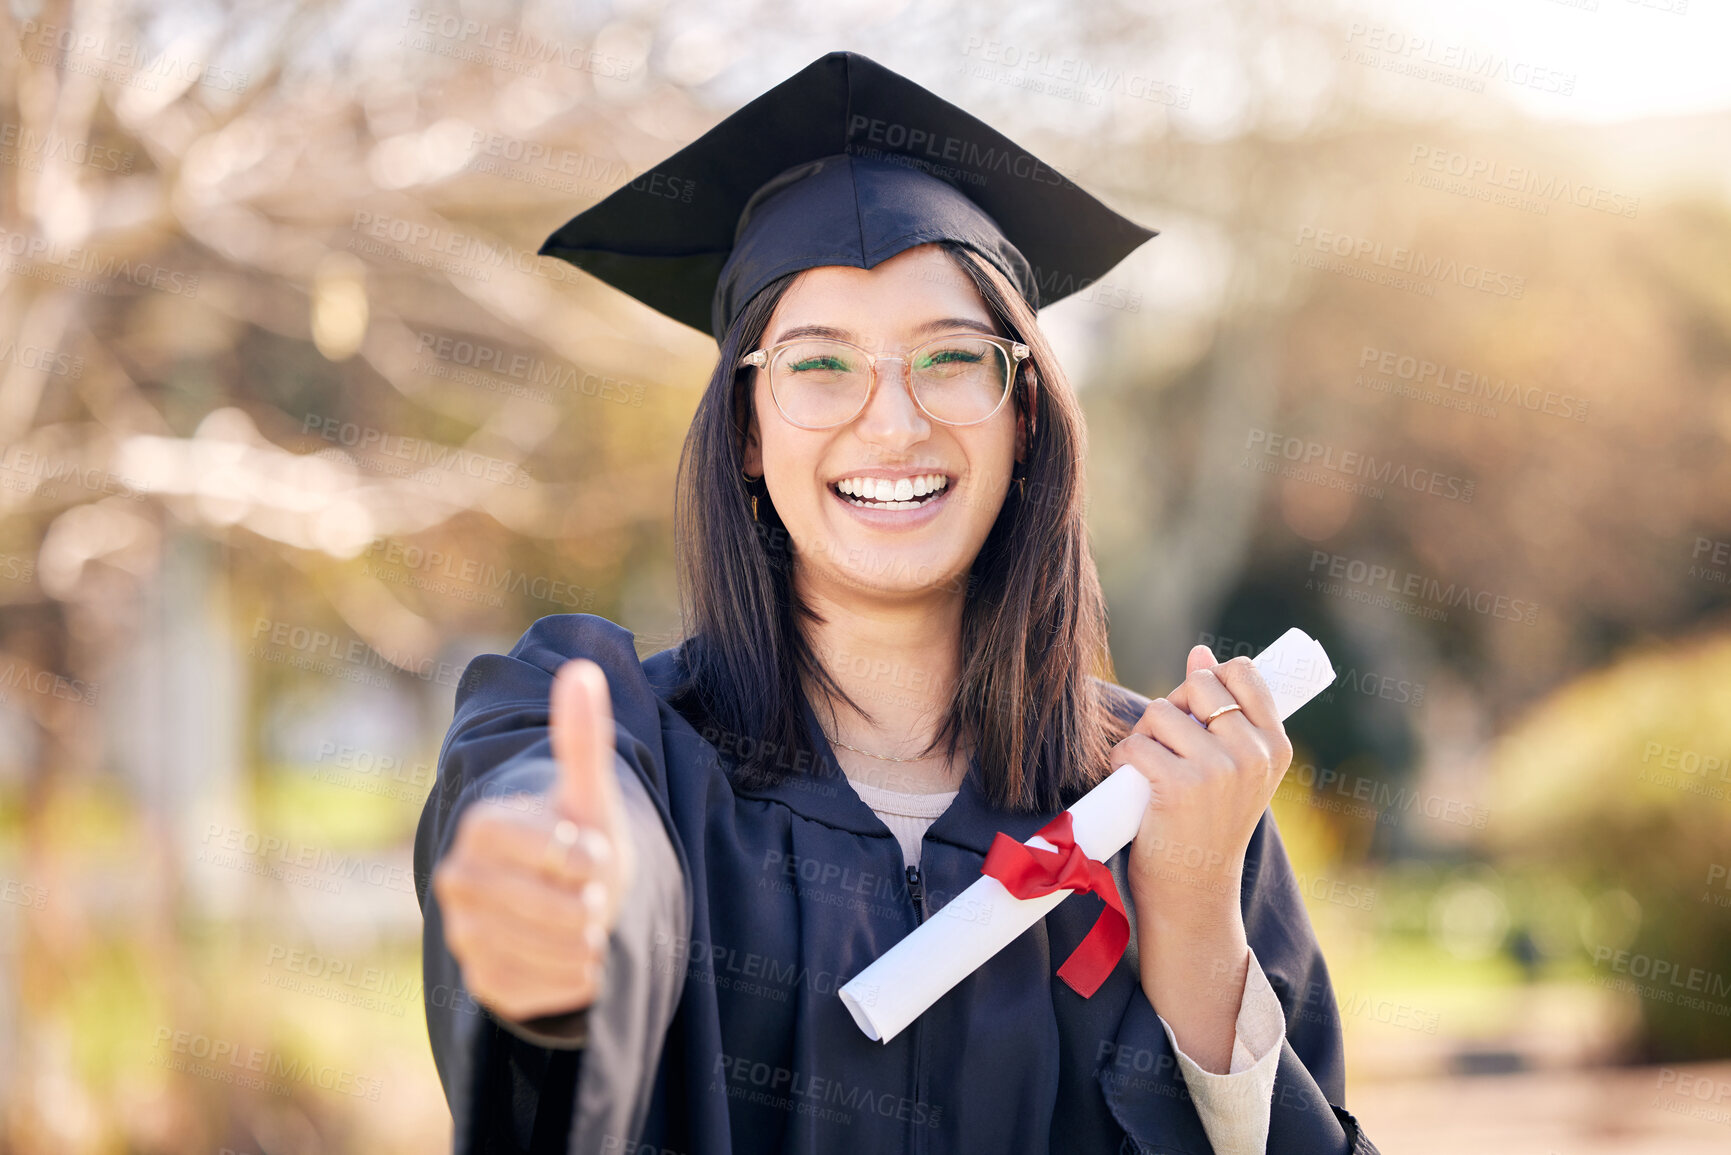 Buy stock photo Shot of a young woman showing thumbs up on graduation day